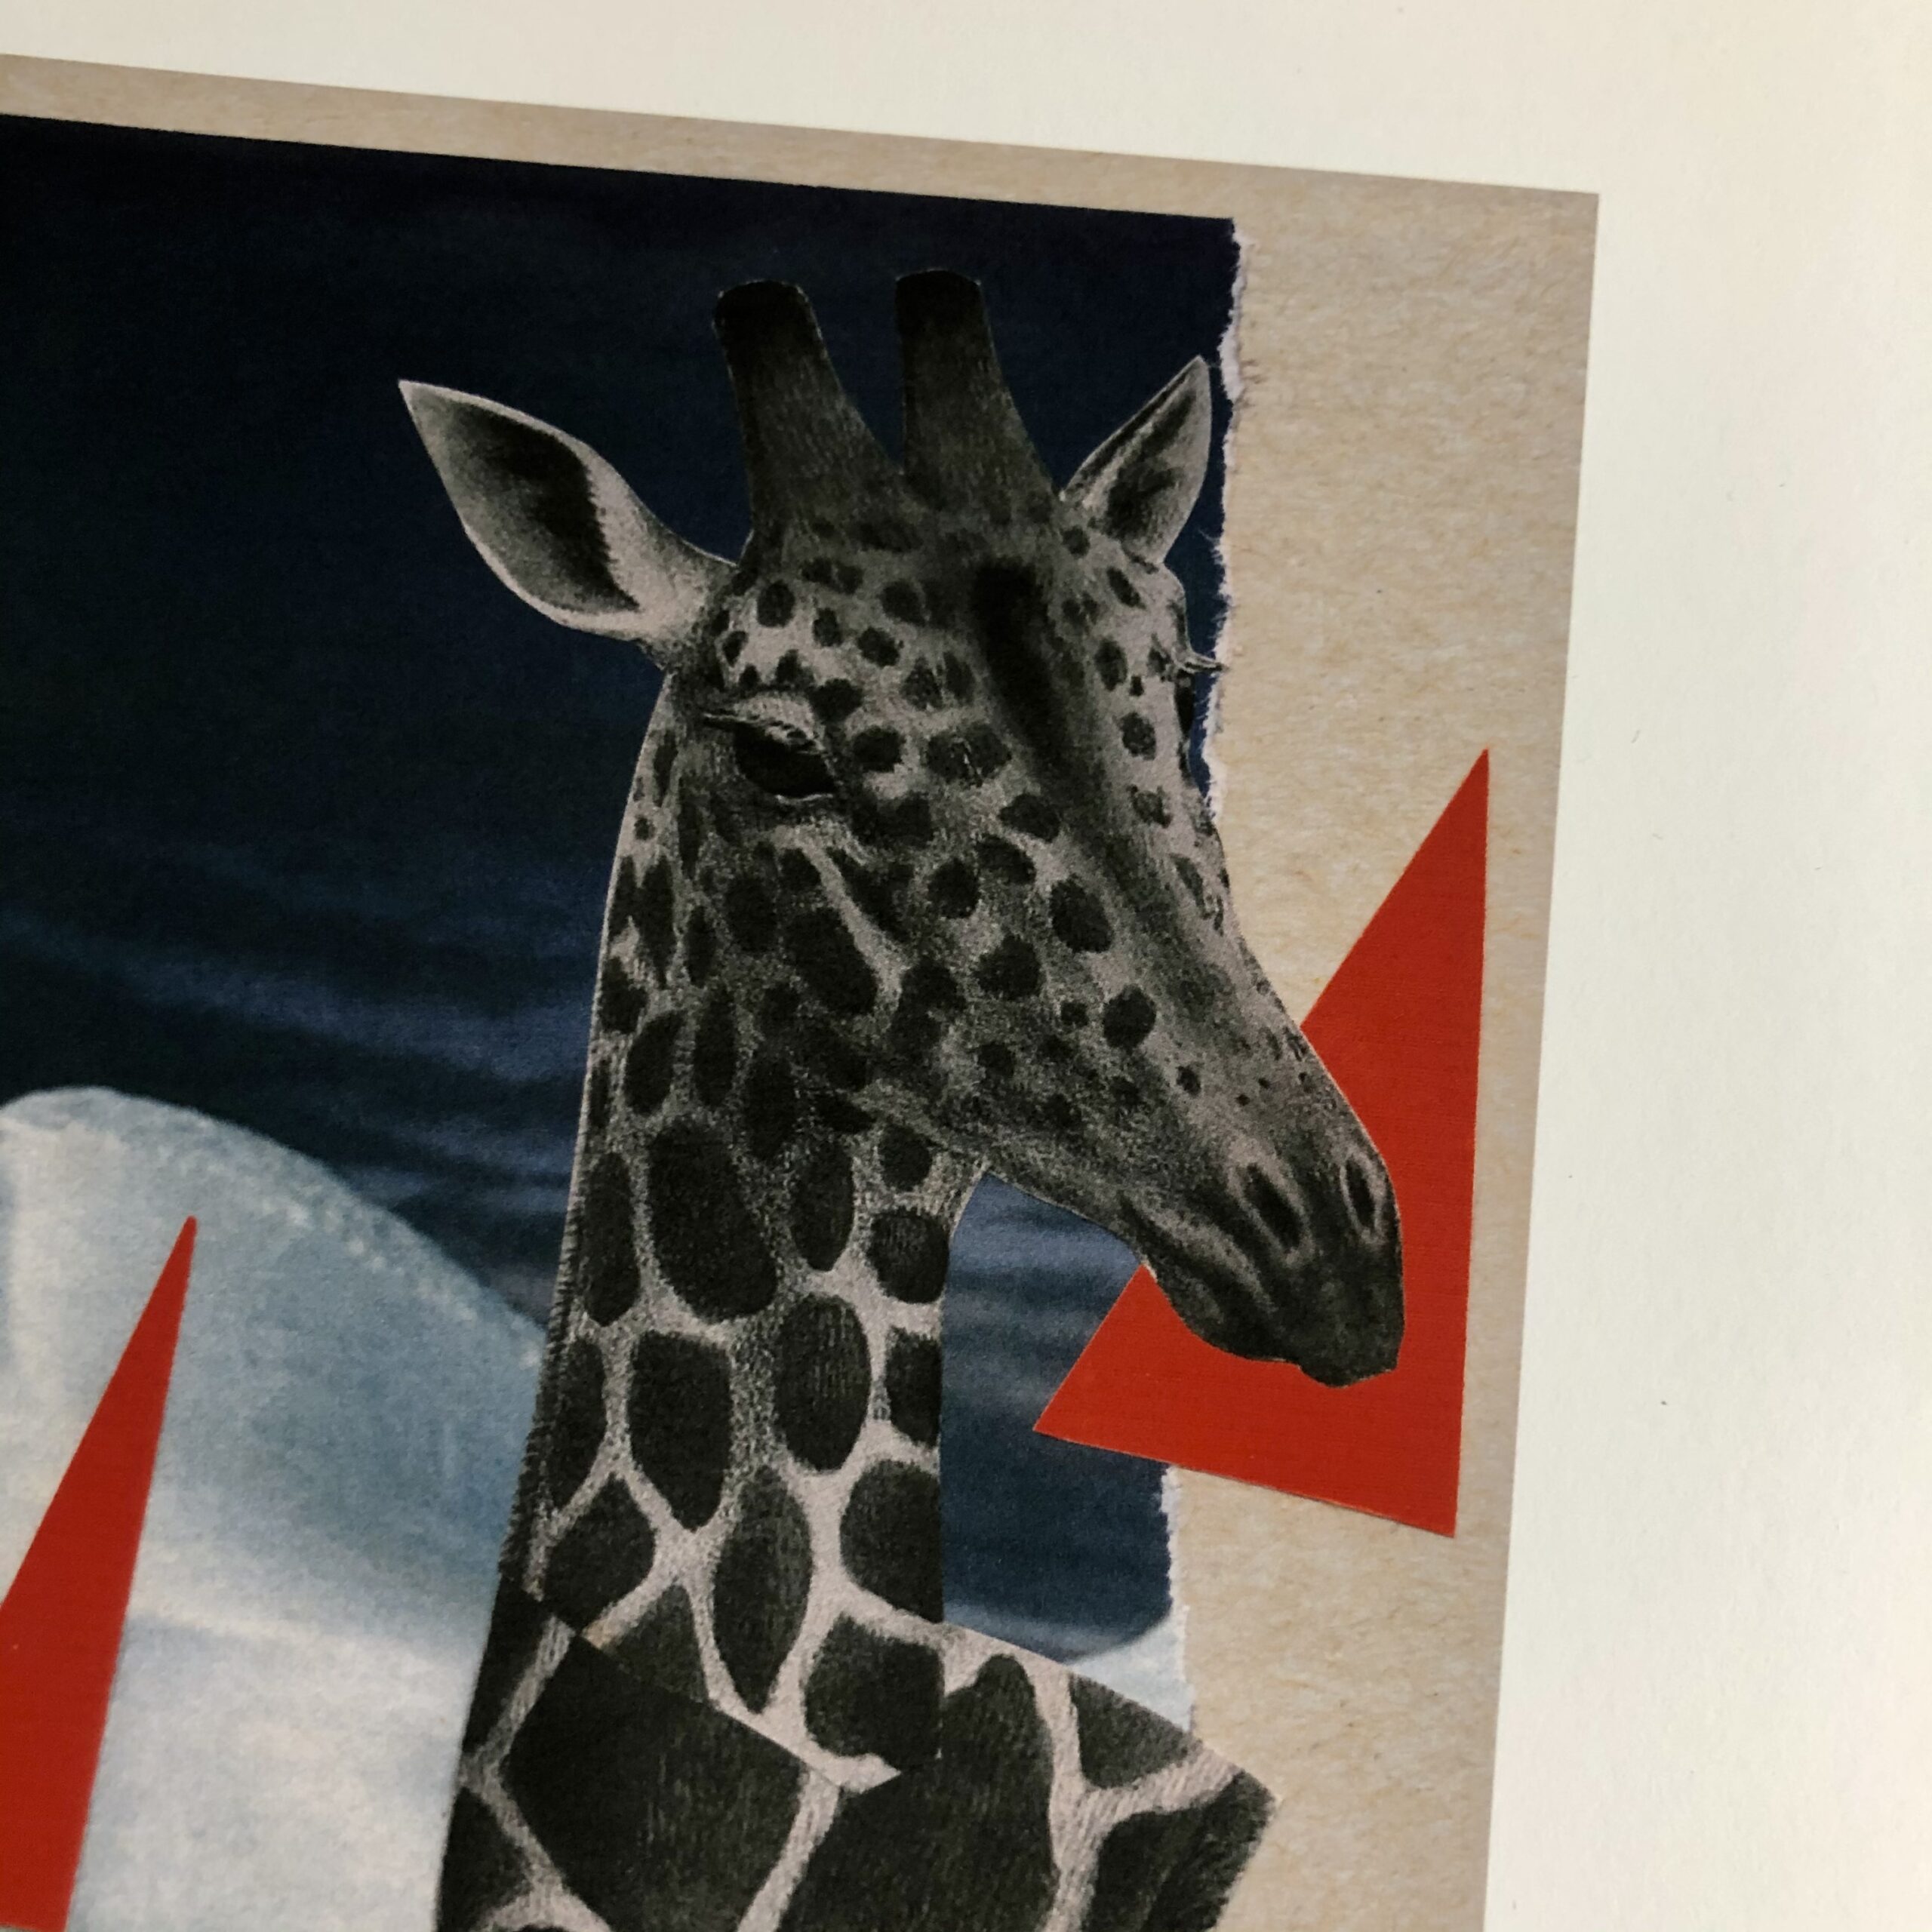 A collage of a black-and-white giraffe swimming in water with some large hot pink triangles and an iceberg. Below the water is a closed-caption style title: (GROANS SOFTLY). The 5 x 7 image is printed on 8 x 10 white paper with a wide border. This is a closeup of the giraffes face.